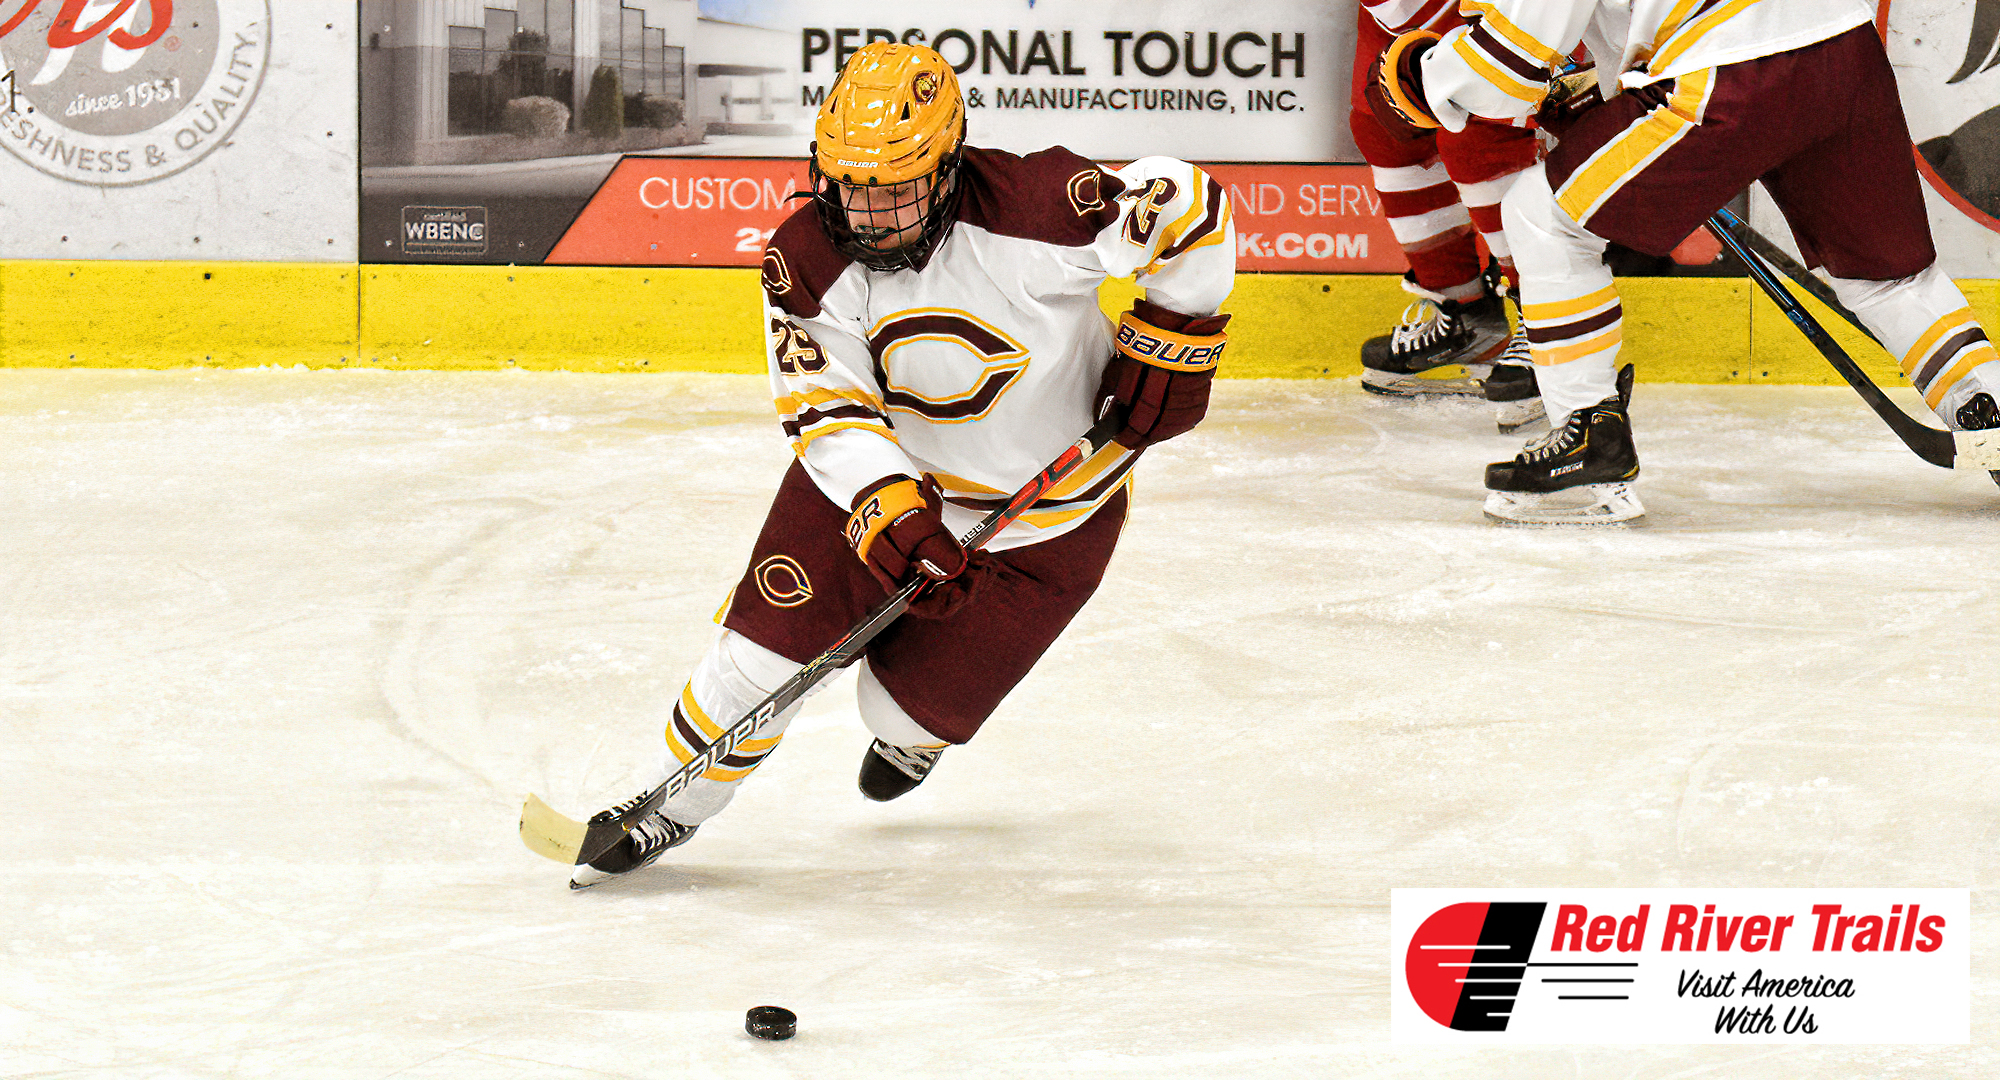 Freshman Jerica Friese scored her first collegiate goal in the Cobbers' 4-3 loss at St. Thomas. Friese scored the opening goal of the game for CC.